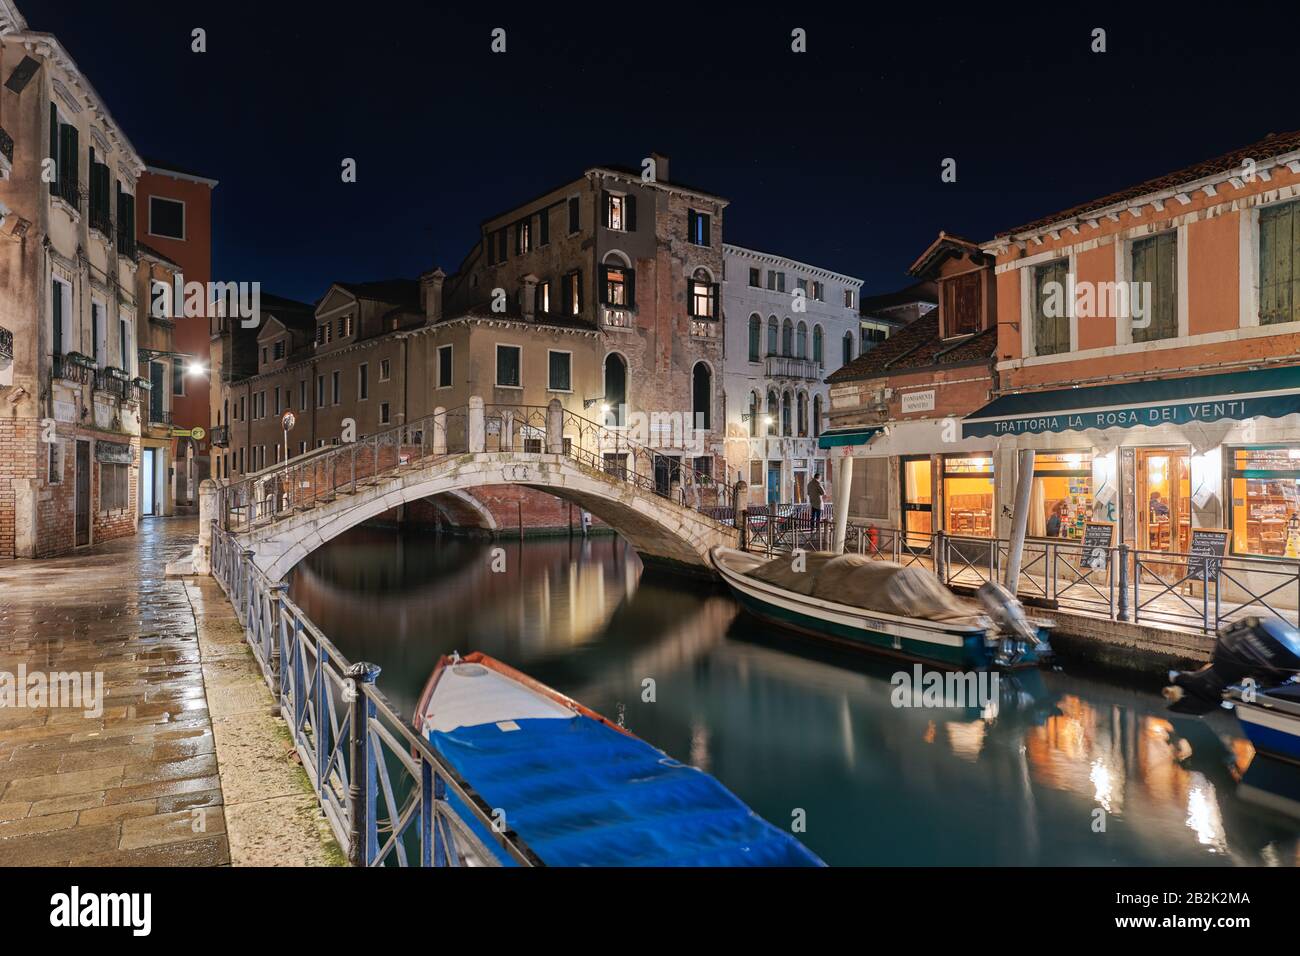 Night view of the romantic Venice with restaurants , bridges and canals Stock Photo